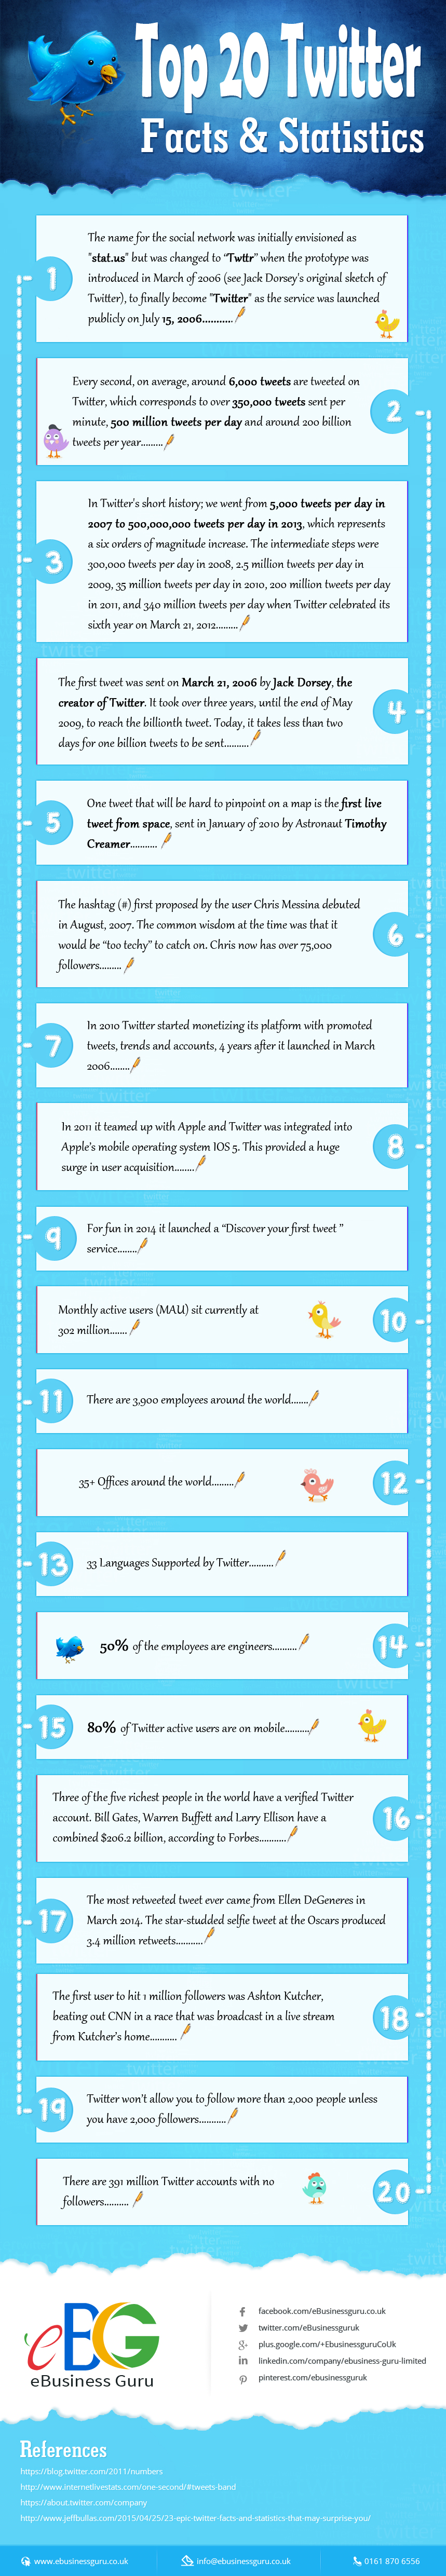 Top 20 Twitter Facts and statistics - Infographic